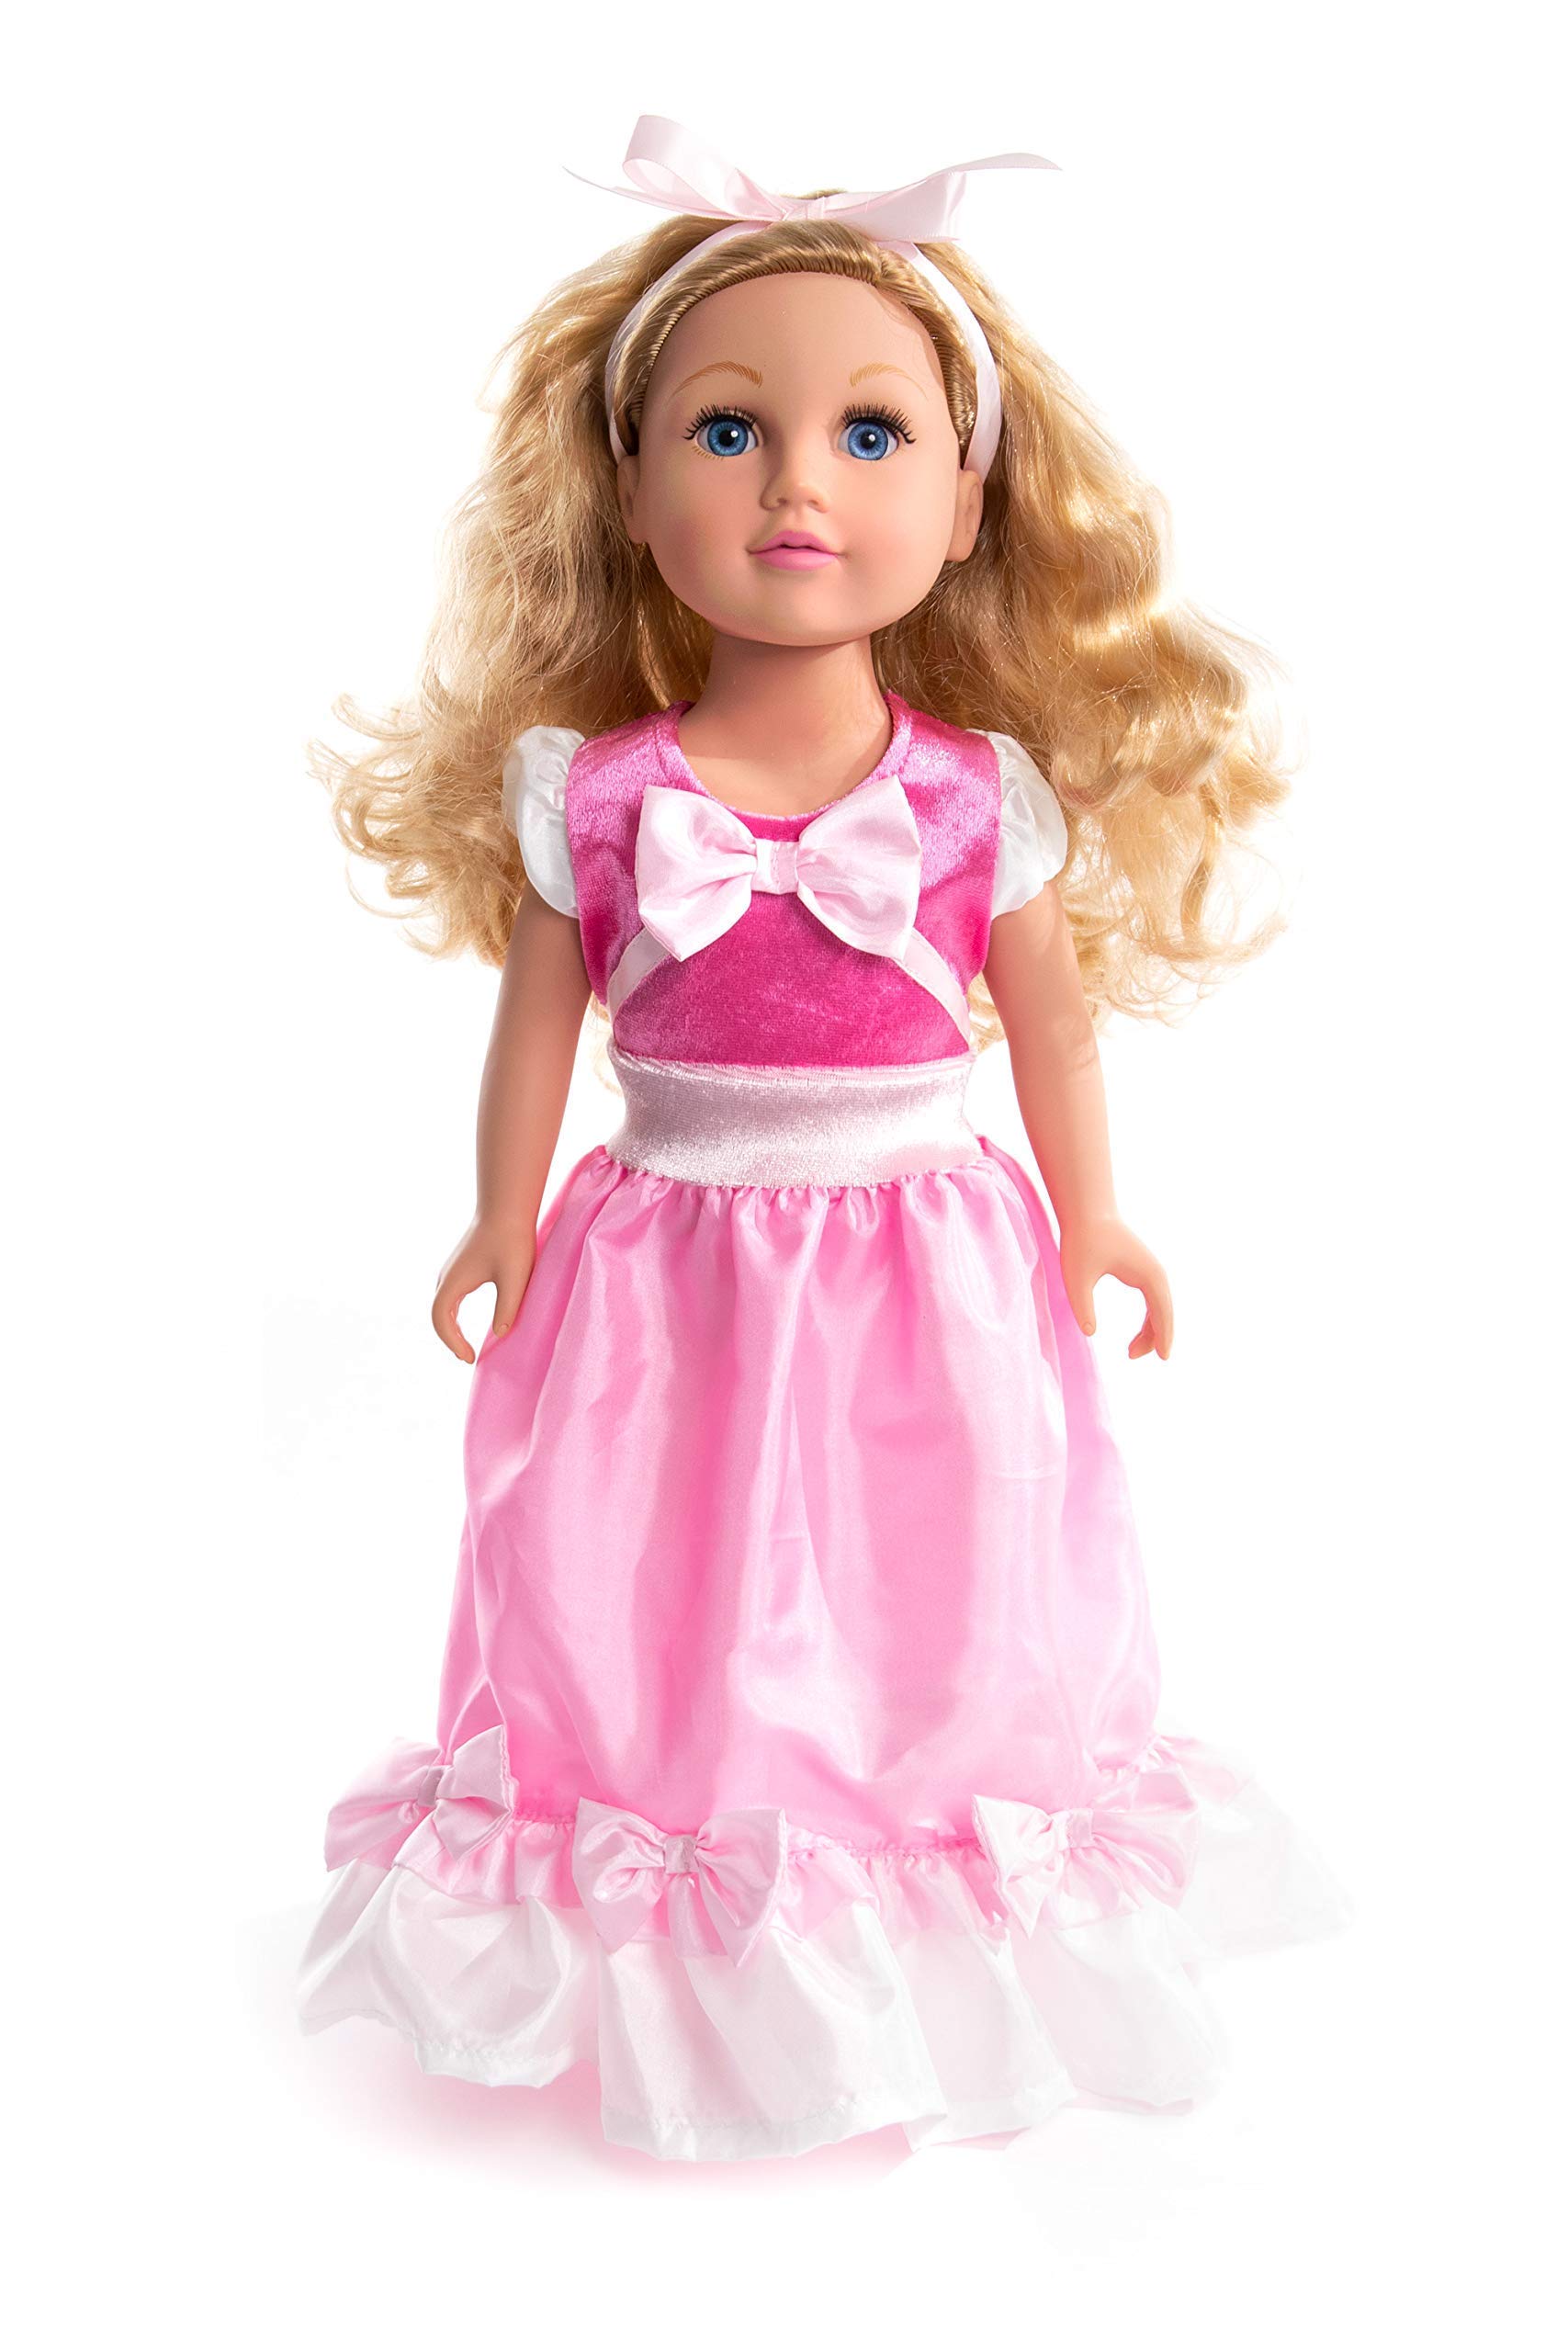 Little Adventures Cinderella Pink Ball Gown Dress up Costume (Med Age 3-5) with Matching Doll Dress - Machine Washable Child Pretend Play and Party Dress with No Glitter